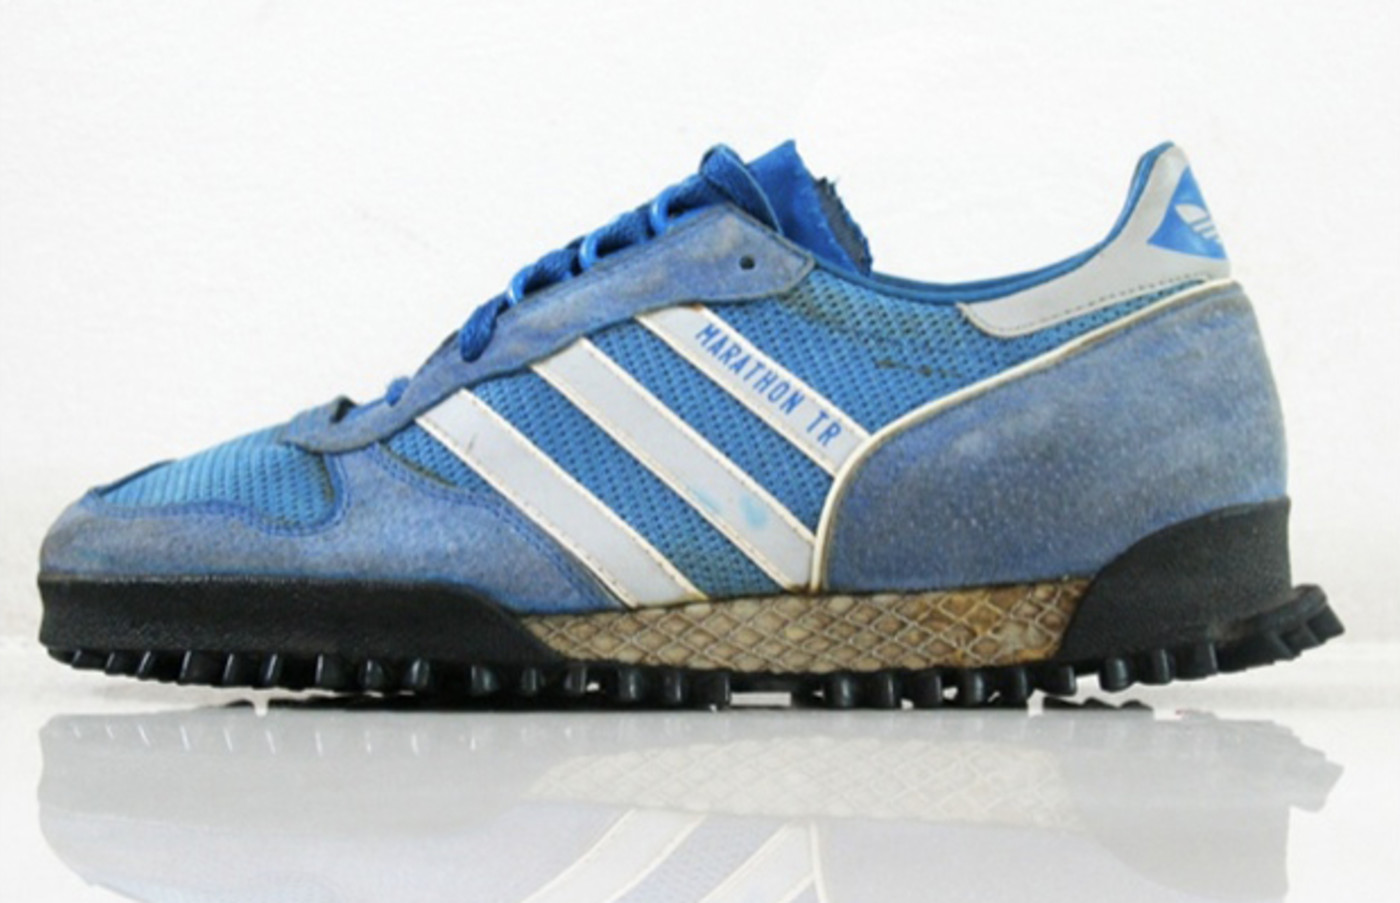 adidas 1980s running shoes